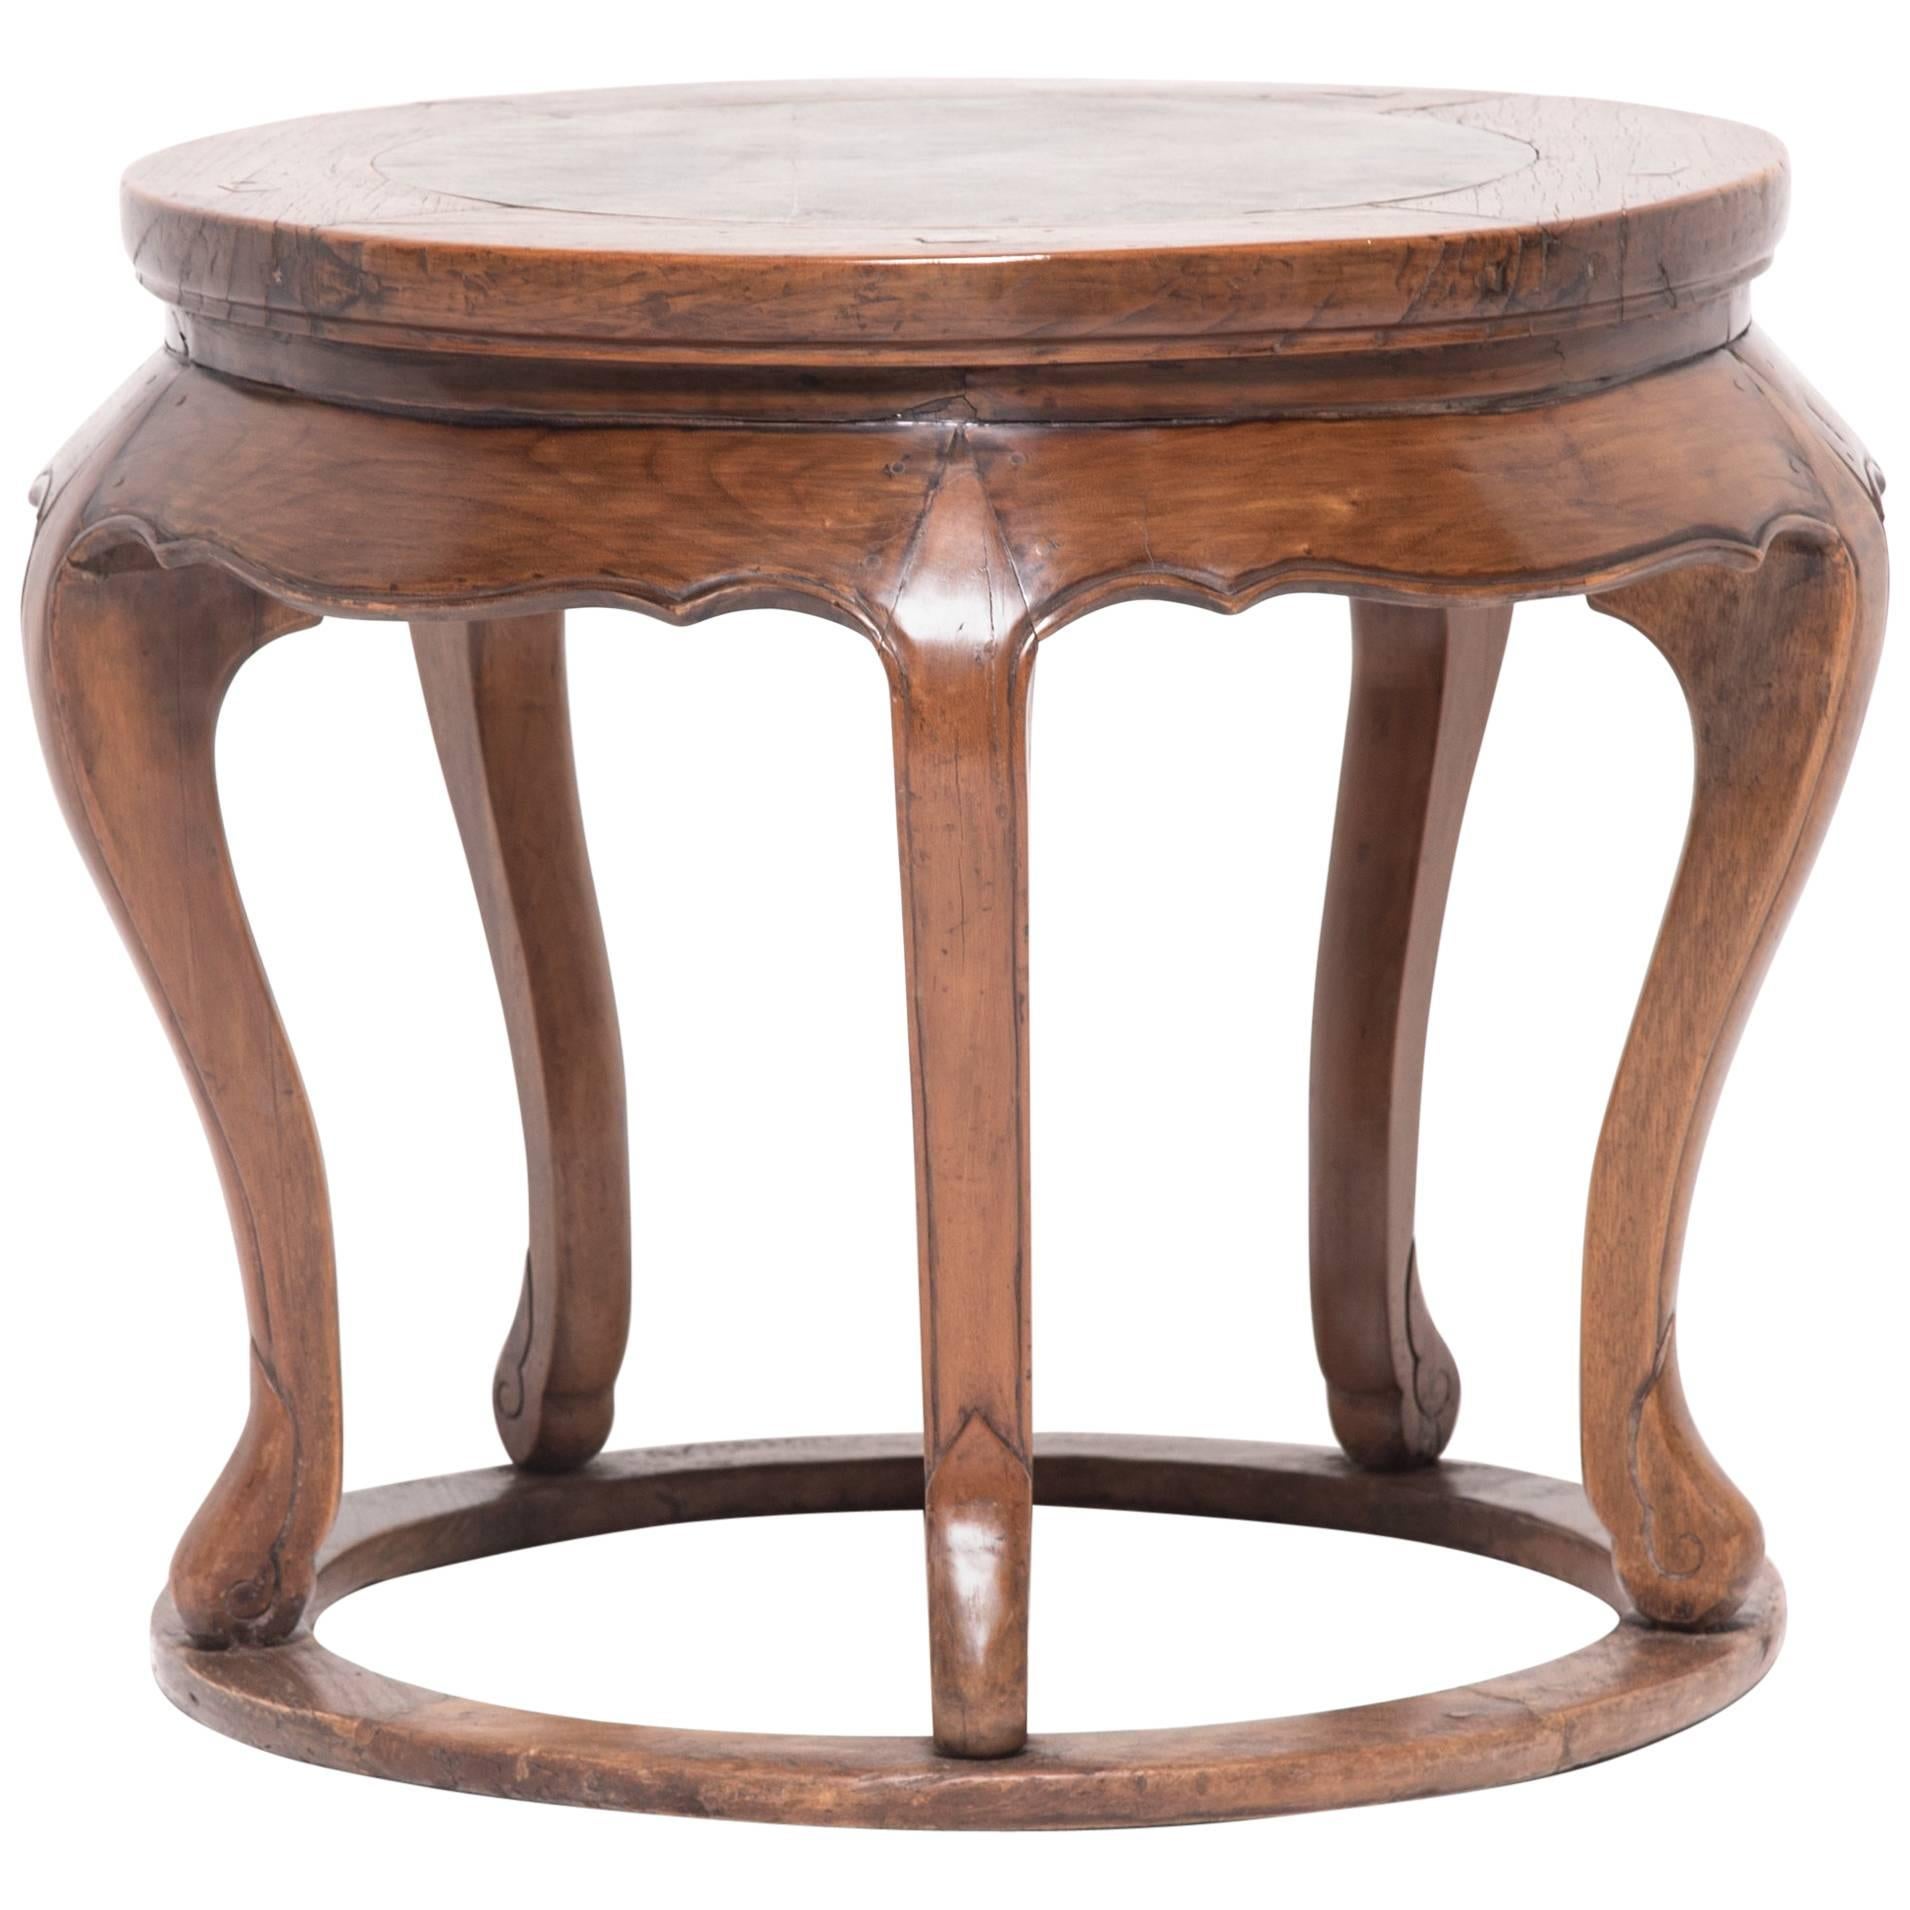 19th Century Chinese Round Table with Marble Top